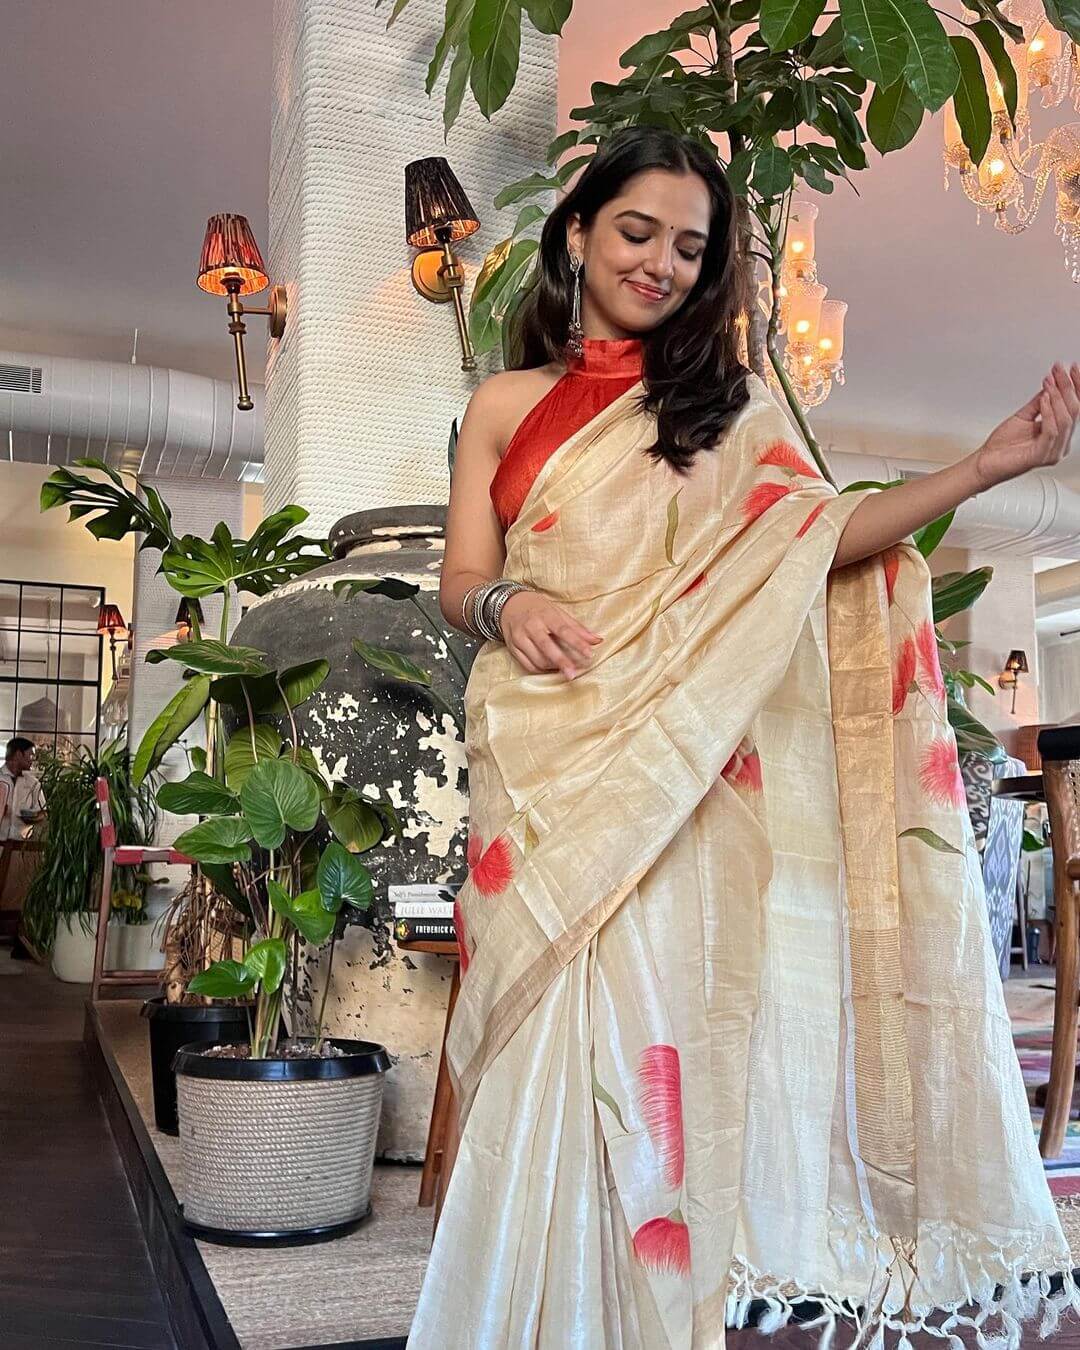 Ahsaas Channa Elegant Look In Red Halter Blouse With Beige Saree Ahsaas Channa Pretty Outfit And Looks